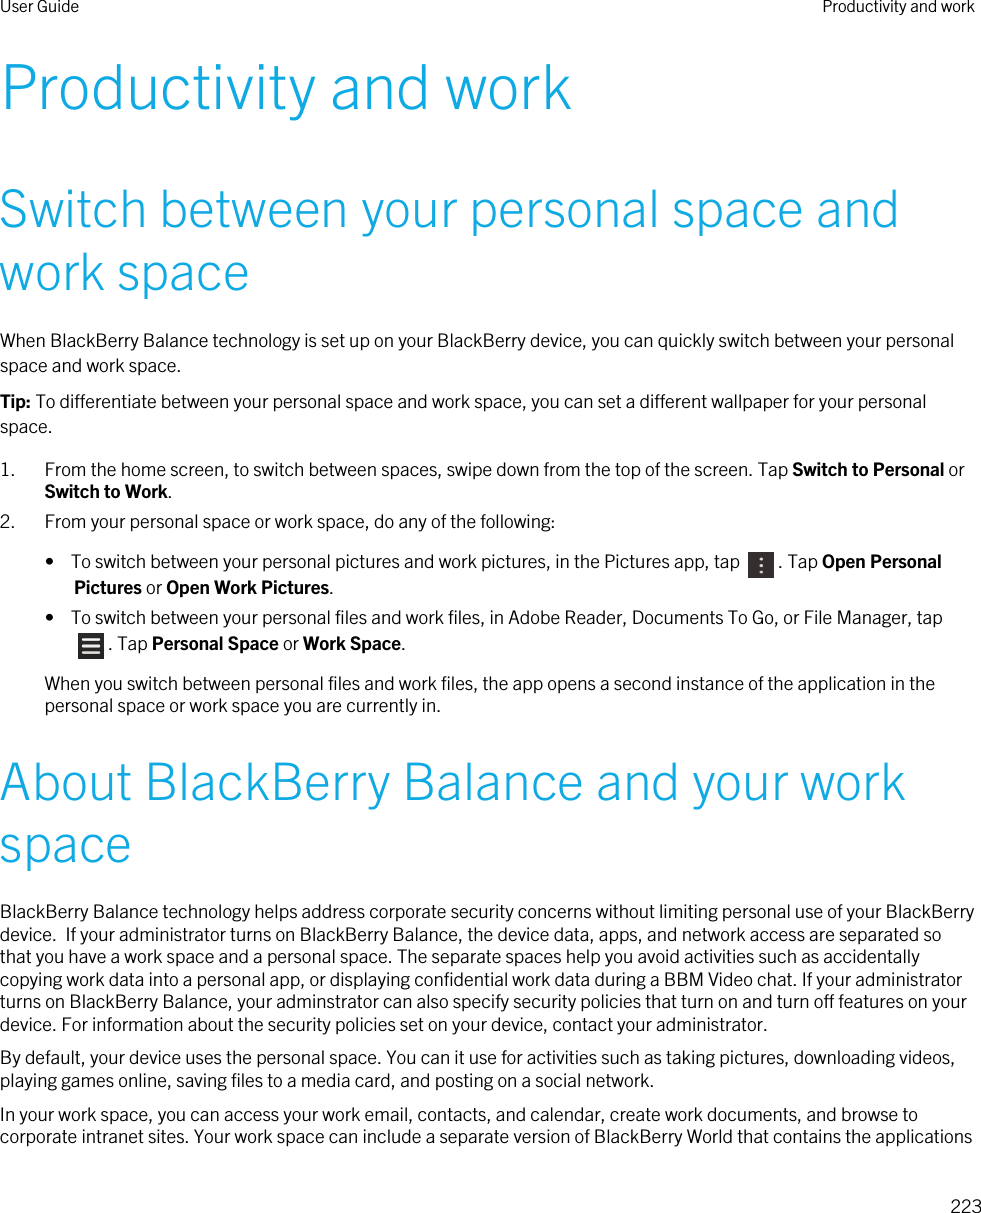 Productivity and workSwitch between your personal space and work spaceWhen BlackBerry Balance technology is set up on your BlackBerry device, you can quickly switch between your personal space and work space.Tip: To differentiate between your personal space and work space, you can set a different wallpaper for your personal space.1. From the home screen, to switch between spaces, swipe down from the top of the screen. Tap Switch to Personal or Switch to Work.2. From your personal space or work space, do any of the following:•  To switch between your personal pictures and work pictures, in the Pictures app, tap  . Tap Open Personal Pictures or Open Work Pictures.•  To switch between your personal files and work files, in Adobe Reader, Documents To Go, or File Manager, tap . Tap Personal Space or Work Space.When you switch between personal files and work files, the app opens a second instance of the application in the personal space or work space you are currently in.About BlackBerry Balance and your work spaceBlackBerry Balance technology helps address corporate security concerns without limiting personal use of your BlackBerry device.  If your administrator turns on BlackBerry Balance, the device data, apps, and network access are separated so that you have a work space and a personal space. The separate spaces help you avoid activities such as accidentally copying work data into a personal app, or displaying confidential work data during a BBM Video chat. If your administrator turns on BlackBerry Balance, your adminstrator can also specify security policies that turn on and turn off features on your device. For information about the security policies set on your device, contact your administrator.By default, your device uses the personal space. You can it use for activities such as taking pictures, downloading videos, playing games online, saving files to a media card, and posting on a social network. In your work space, you can access your work email, contacts, and calendar, create work documents, and browse to corporate intranet sites. Your work space can include a separate version of BlackBerry World that contains the applications User Guide Productivity and work223